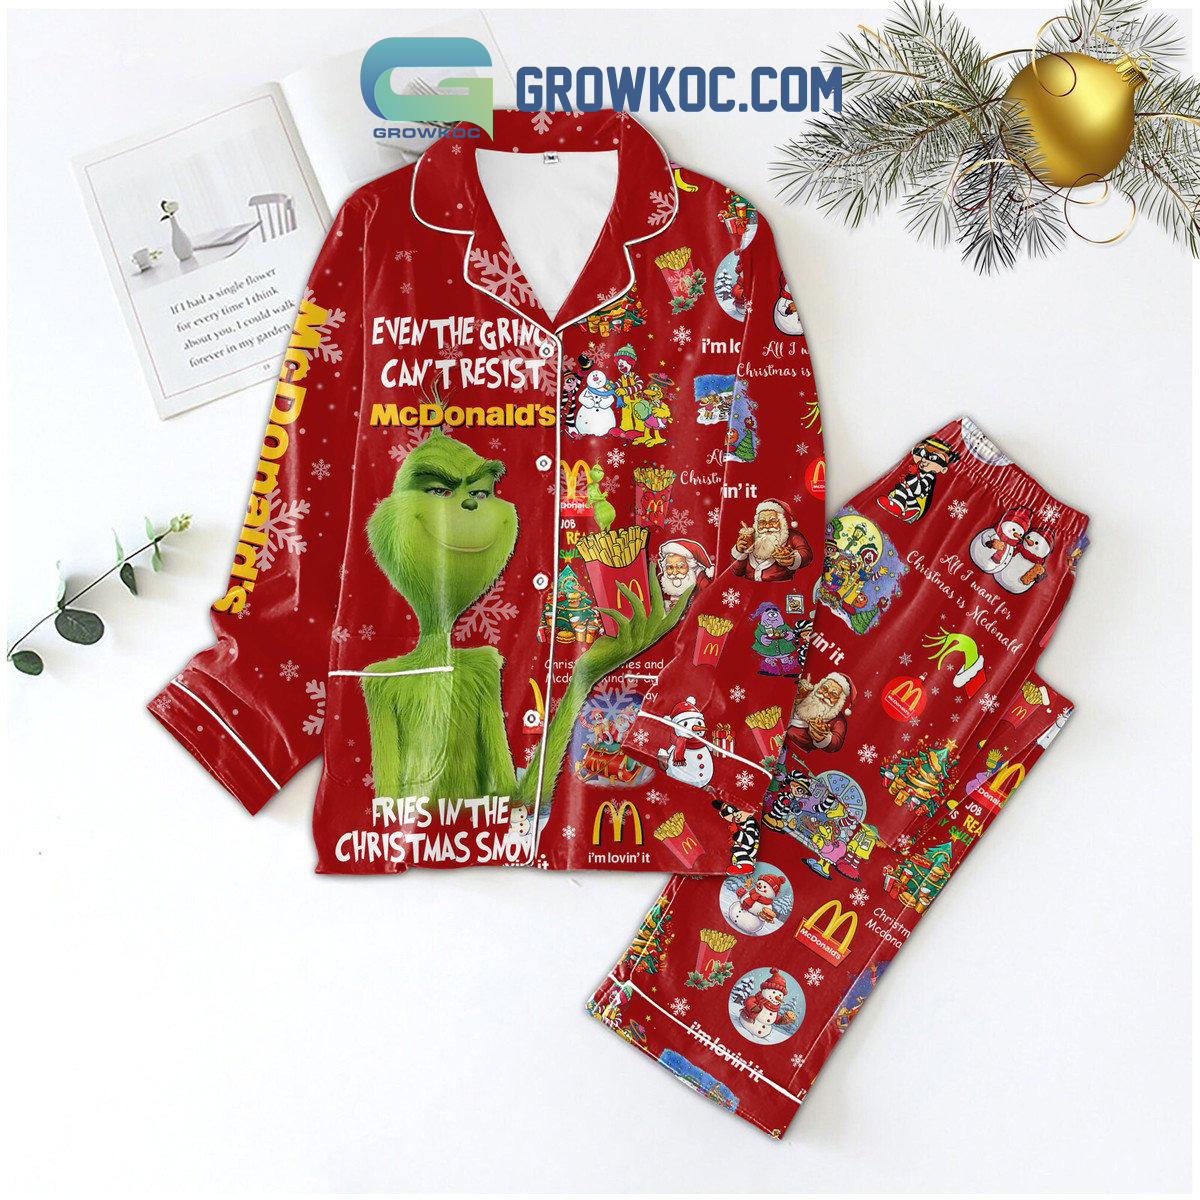 Even The Grinch Can't Resist McDonald's Fries In The Christmas Snow I'm Lovin'It Christmas Silk Pajamas Set